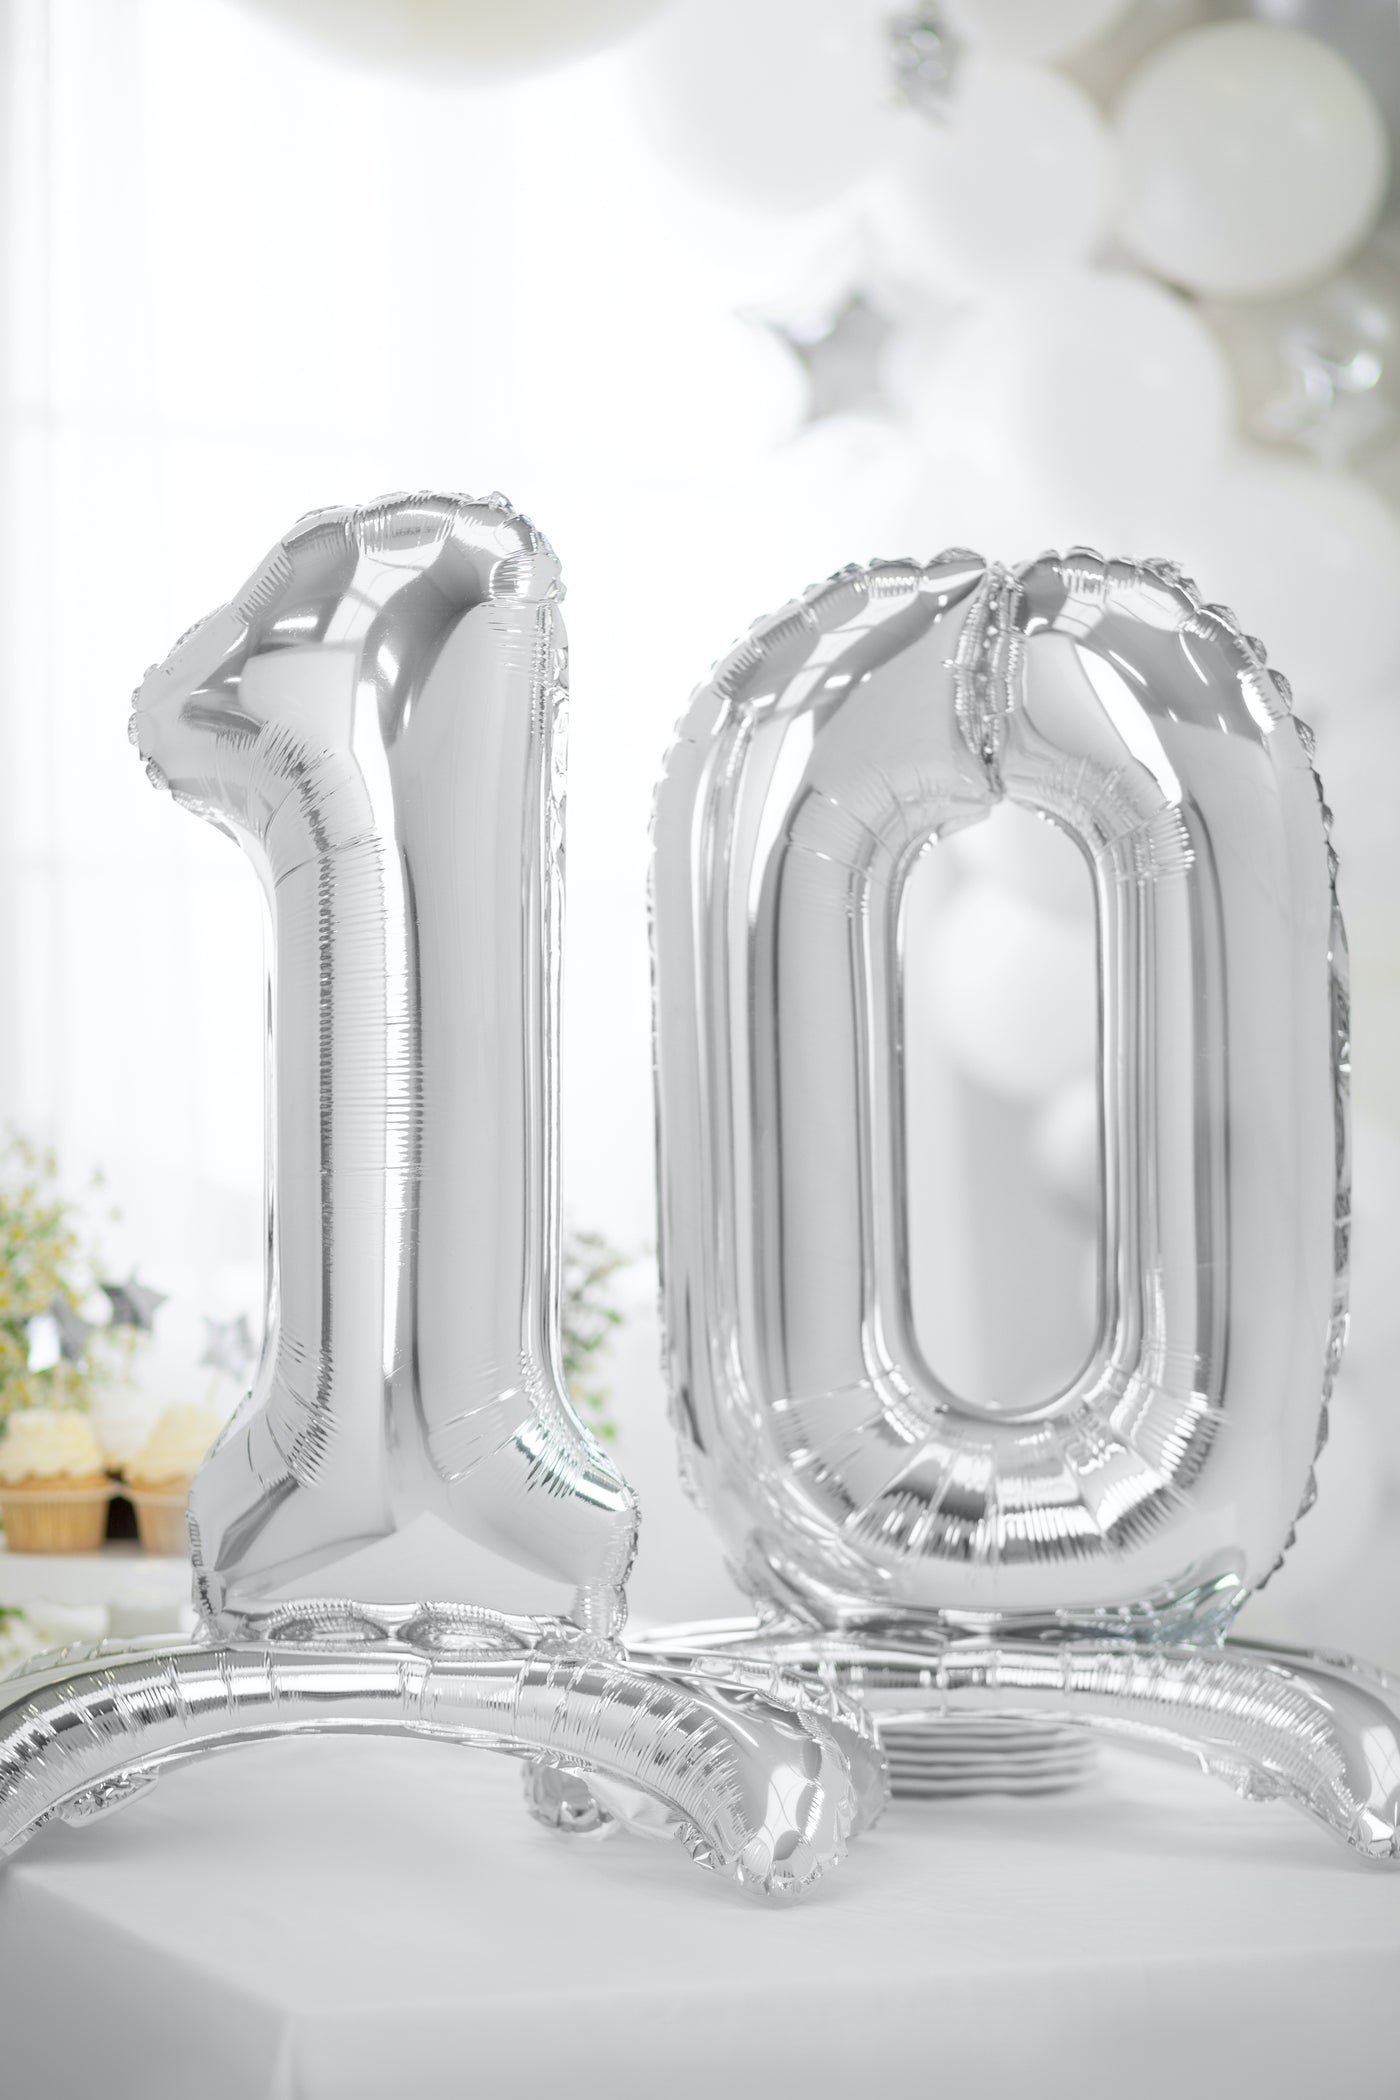 Standing Number Foil Balloon (0-9), silver